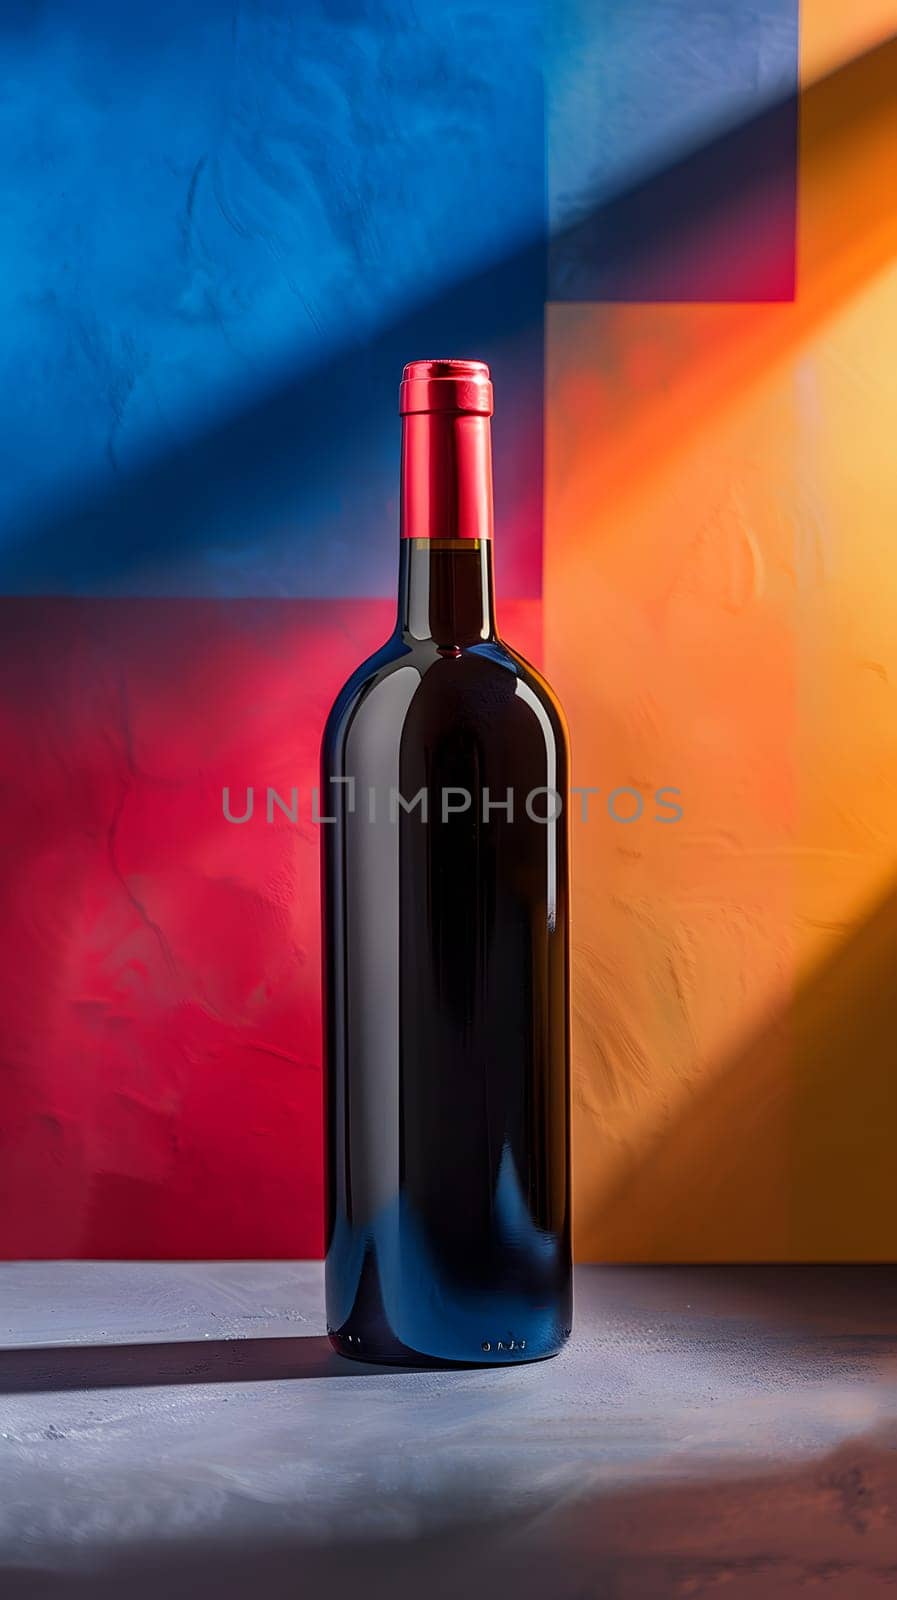 A glass bottle of red wine with a cork stopper is on a table, against a colorful background. The cylindershaped drinkware contains a delicious liquid ready to be enjoyed